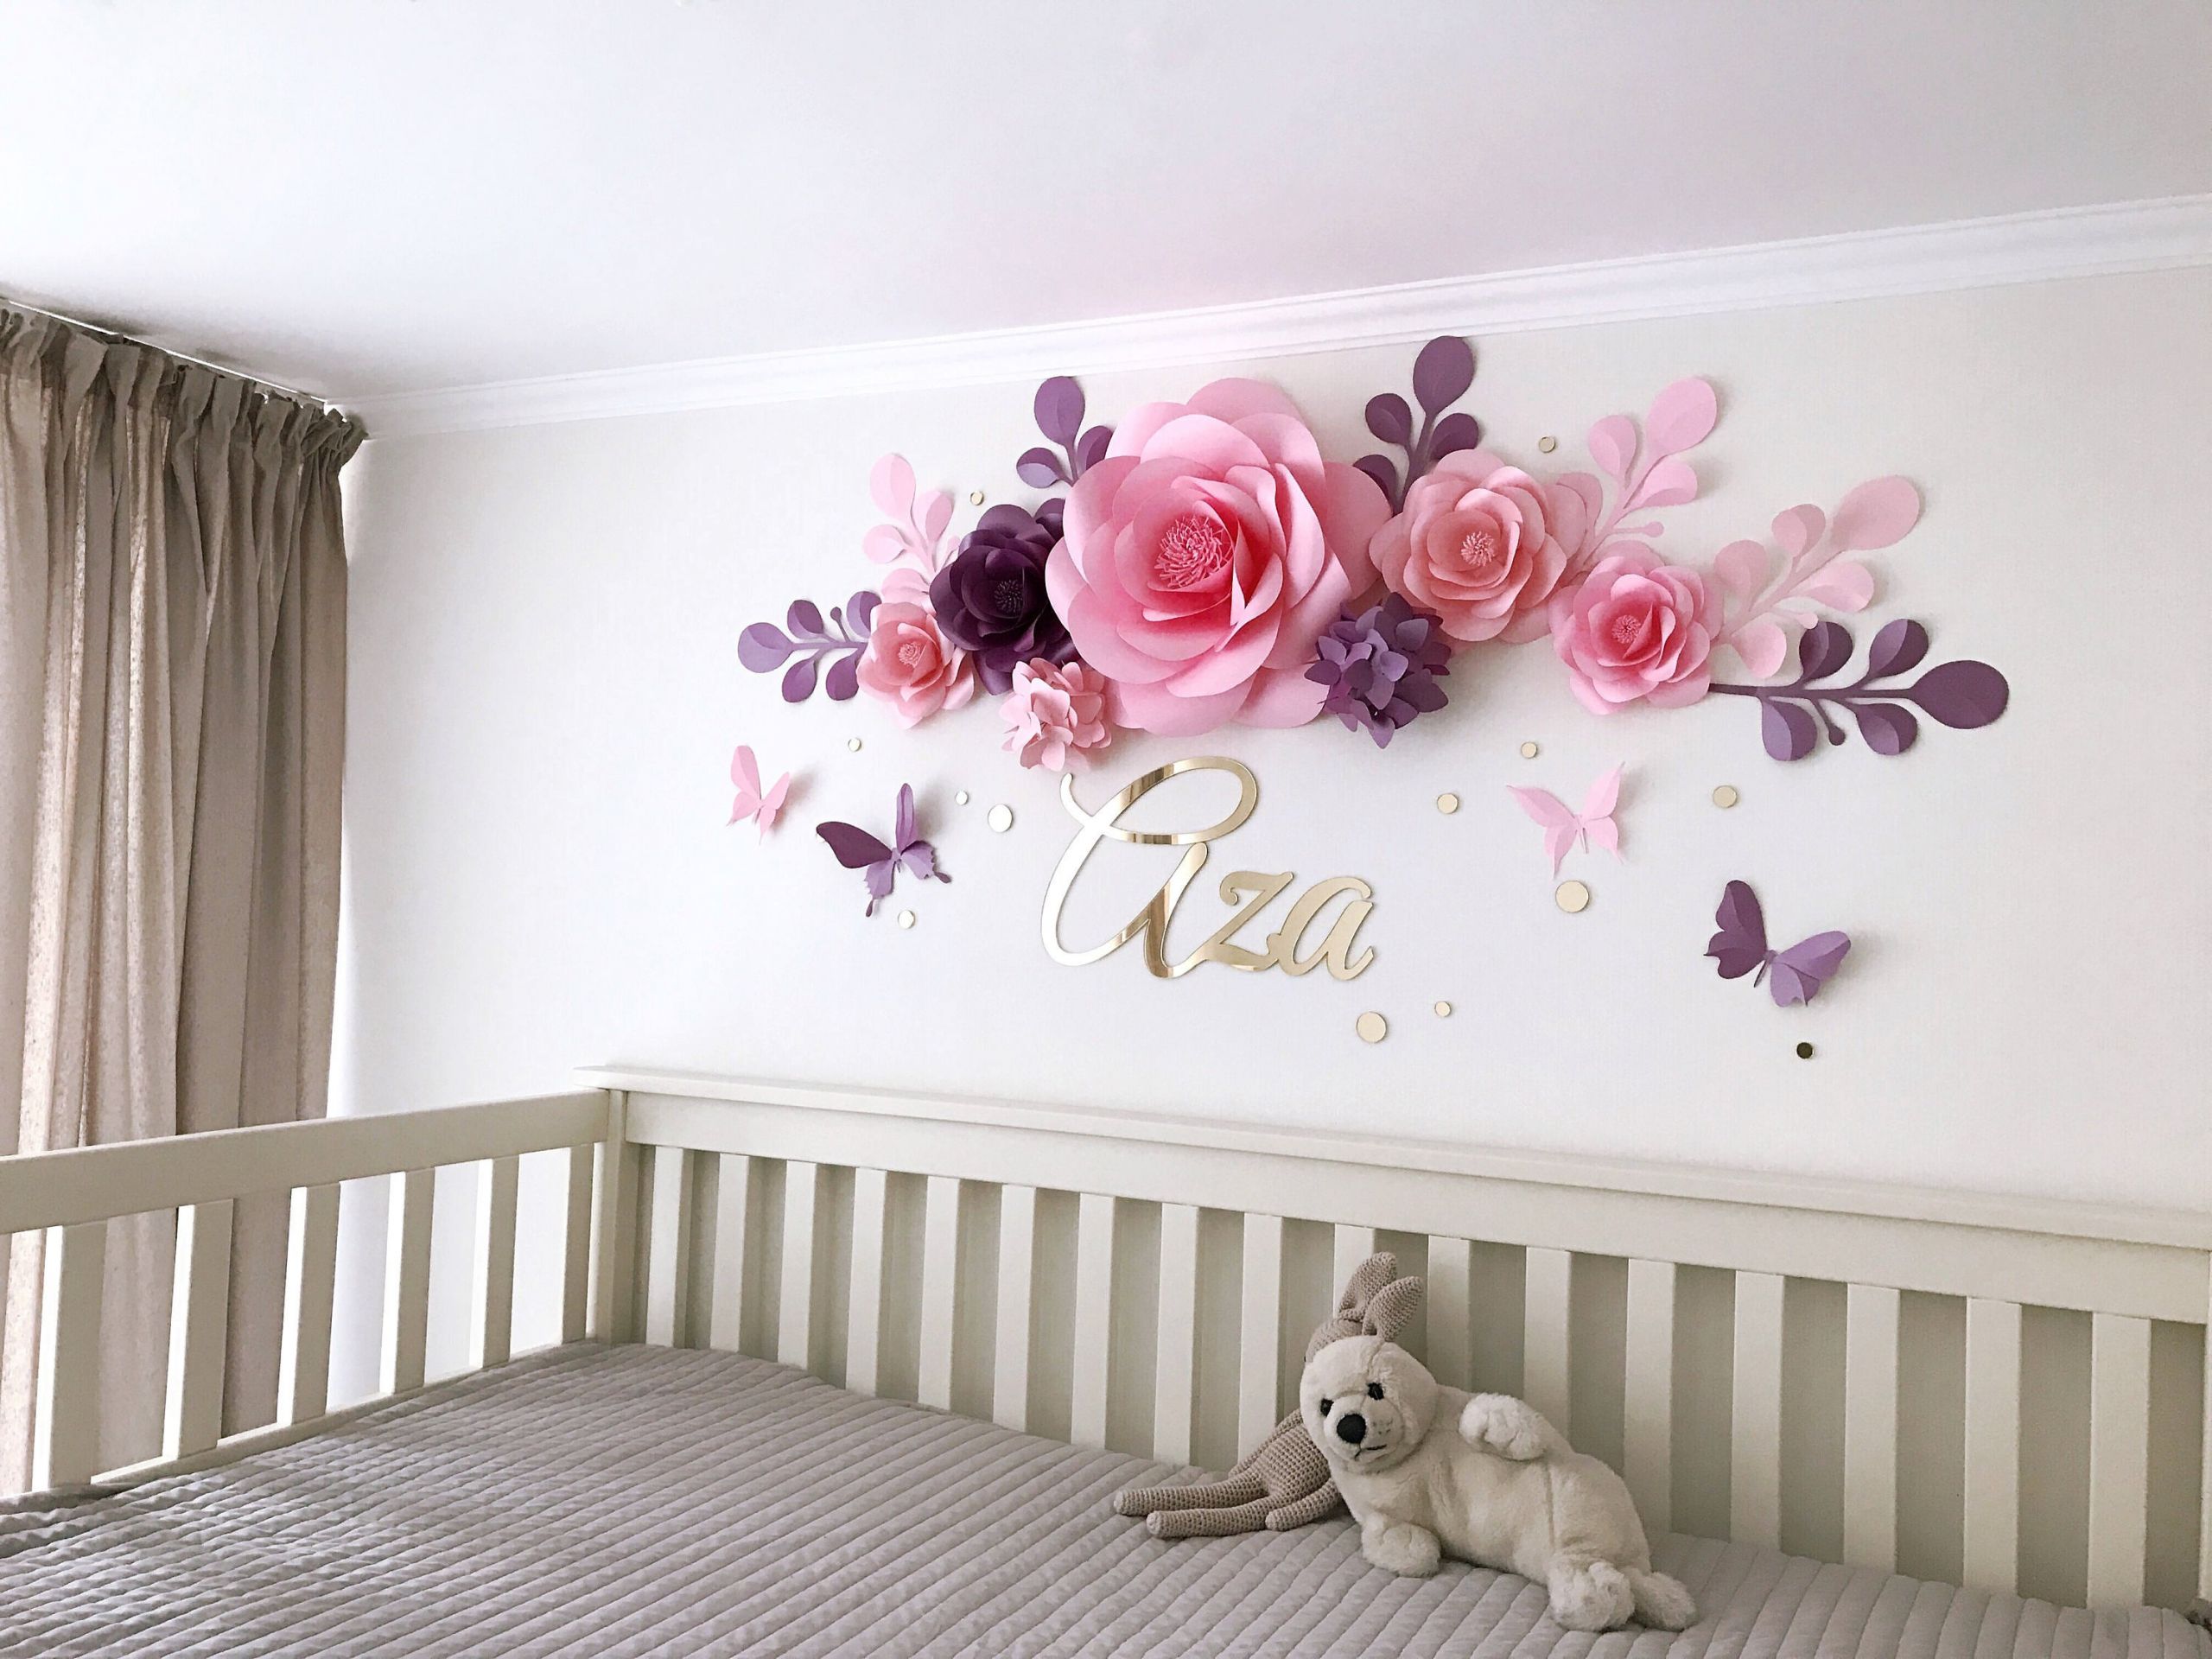 Room Decoration For Baby Girl
 Nursery Paper Flowers Paper flowers over the crib Baby